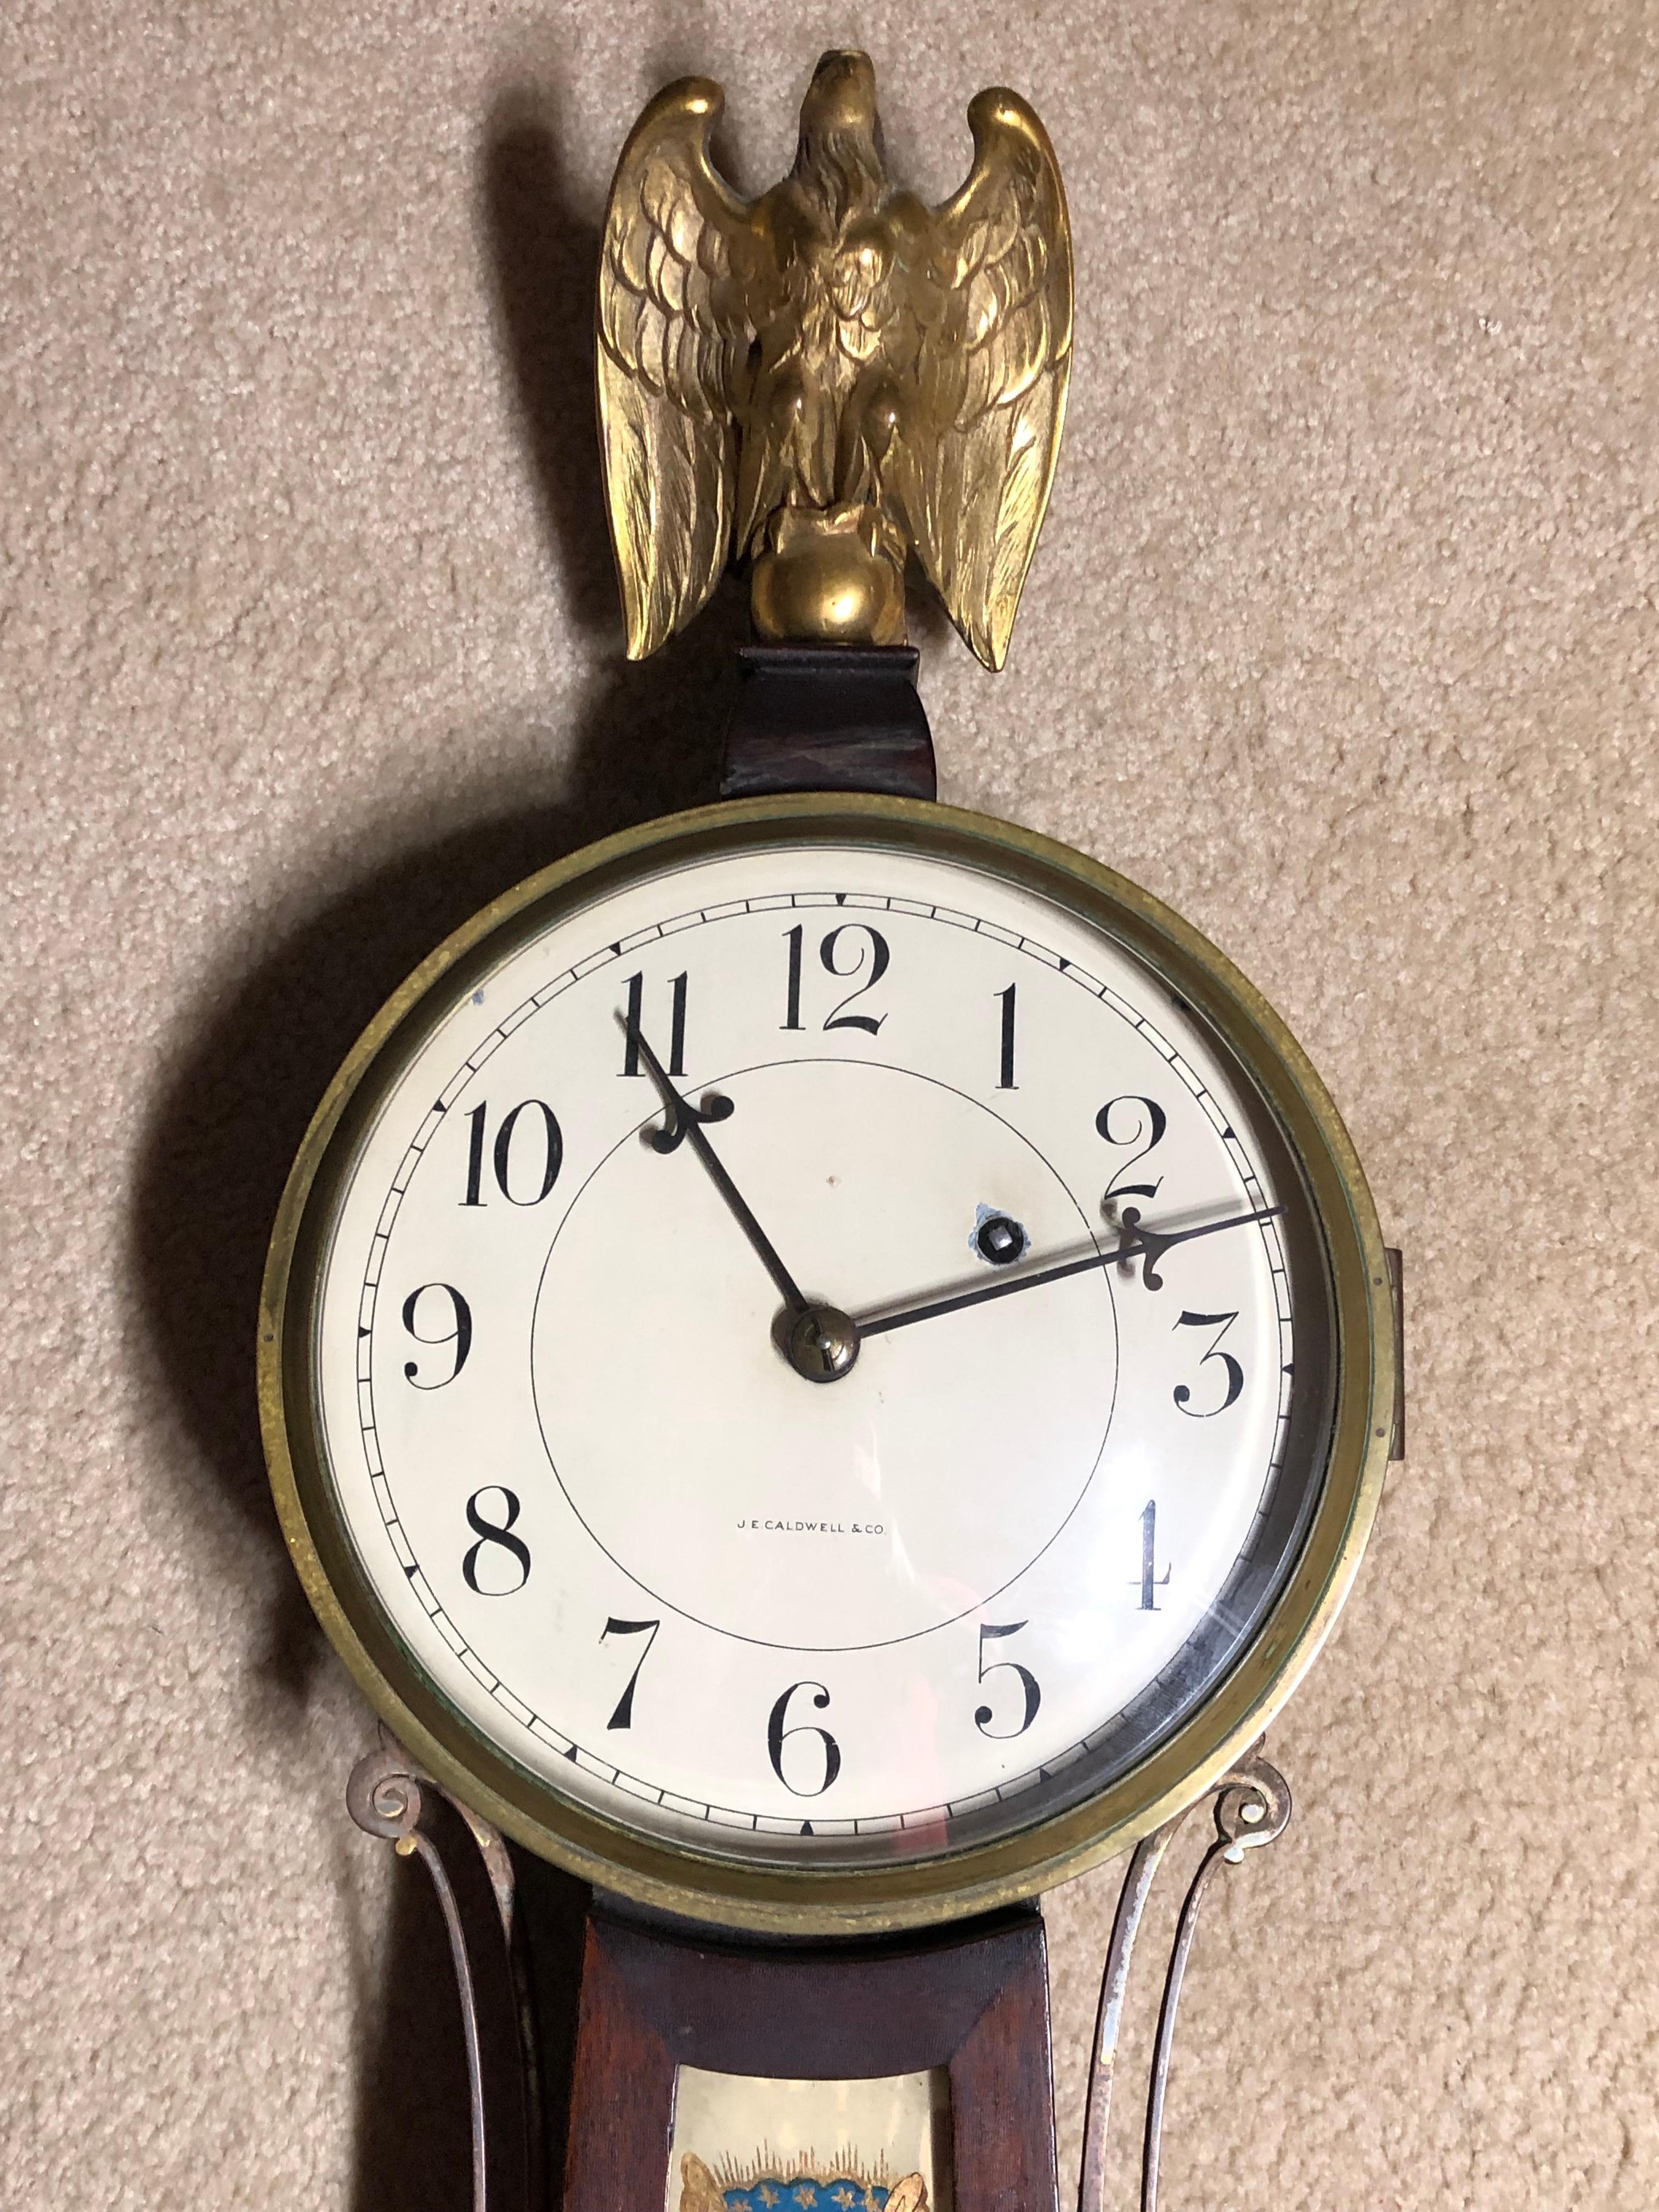 This is a very colorful Federal Massachusetts Improved Timepiece or “Banjo clock” made by the Waltham Clock Company of Waltham, Massachusetts.
This is a fine example. The brass movement is mounted to the clock with screws that attach the back plate